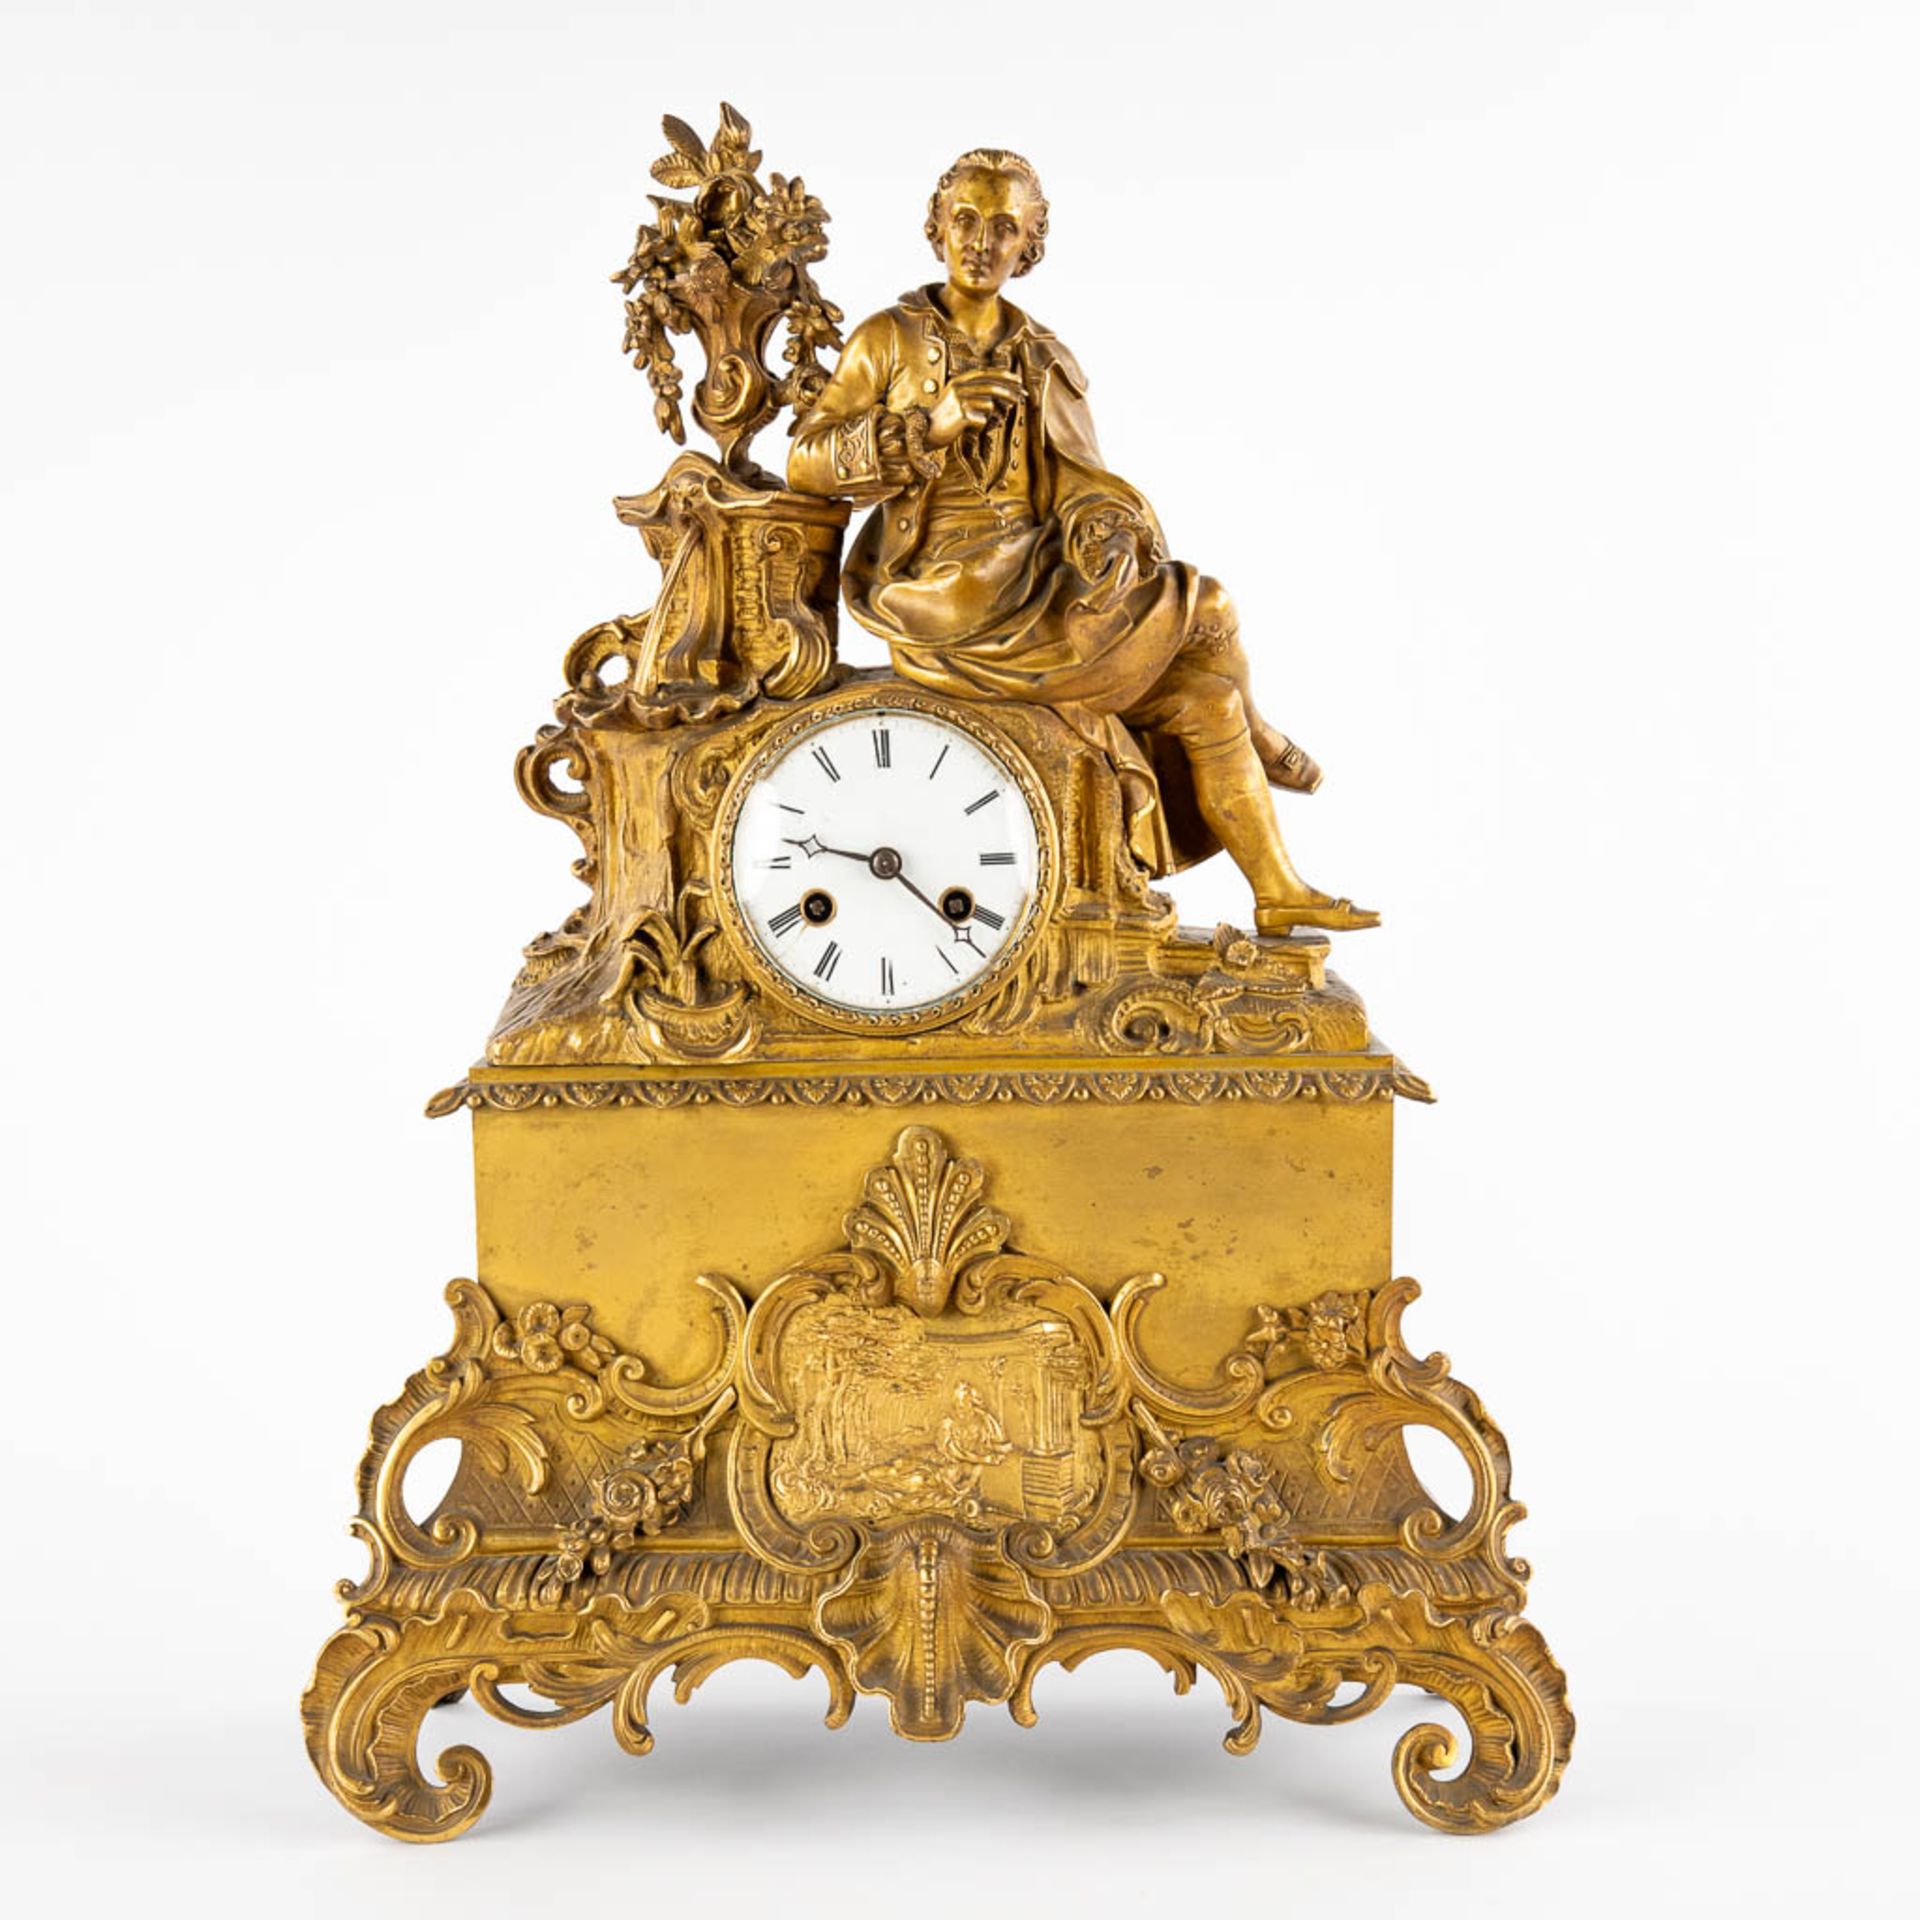 A mantle clock, gilt bronze with an image of a man taking notes. France, 19th C. (D:15 x W:45 x H:38